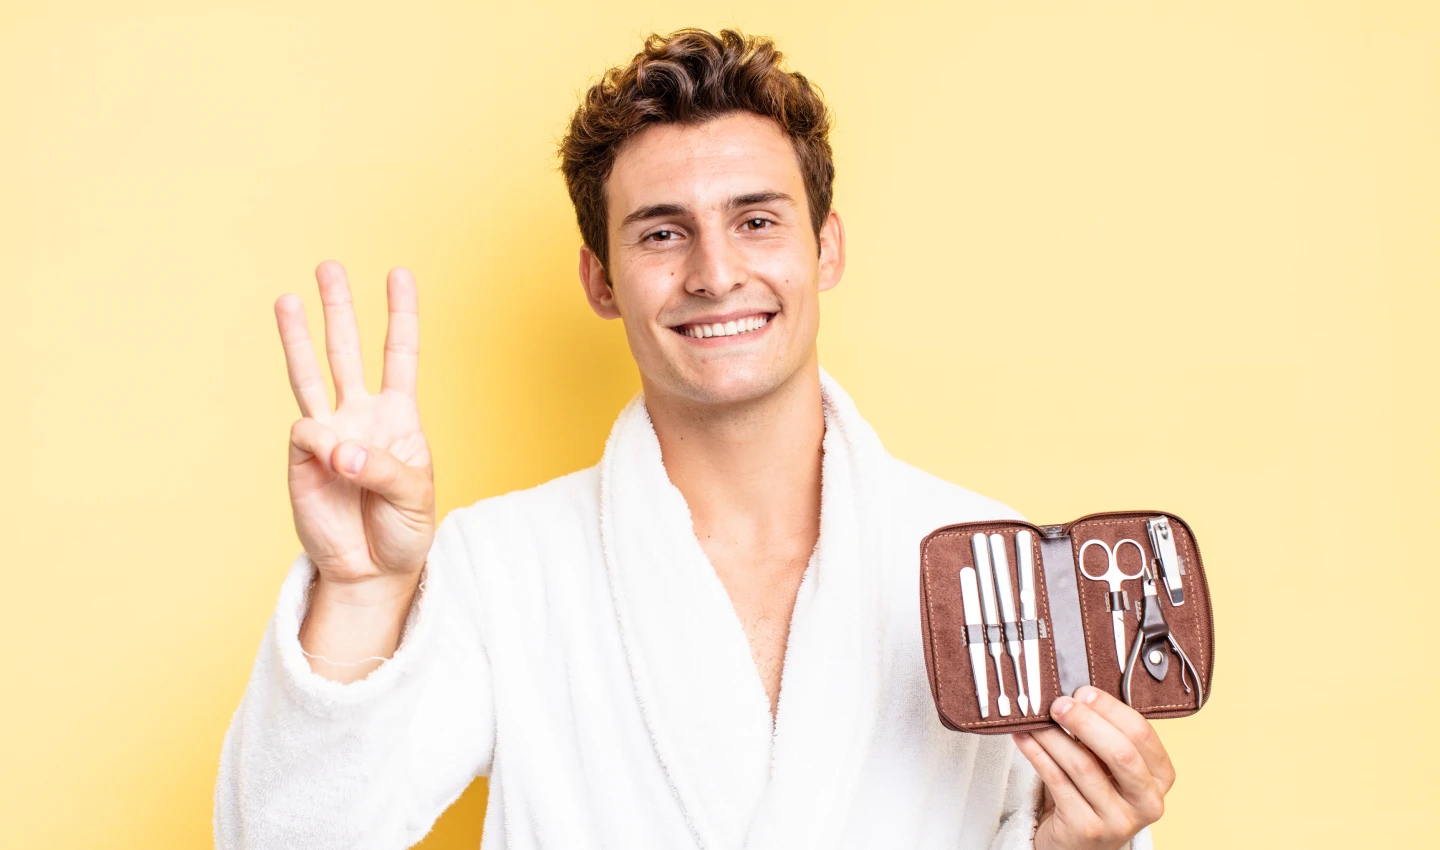 Mindful Body Care for Men - An image of a young man wearing a white bathrobe and holding a grooming set in his hand. The man's happy expression suggests the benefits of prioritizing self-care through mindful body care practices. The image emphasizes the importance of incorporating mindfulness into your body care routine, from using natural products to practicing self-awareness and relaxation.